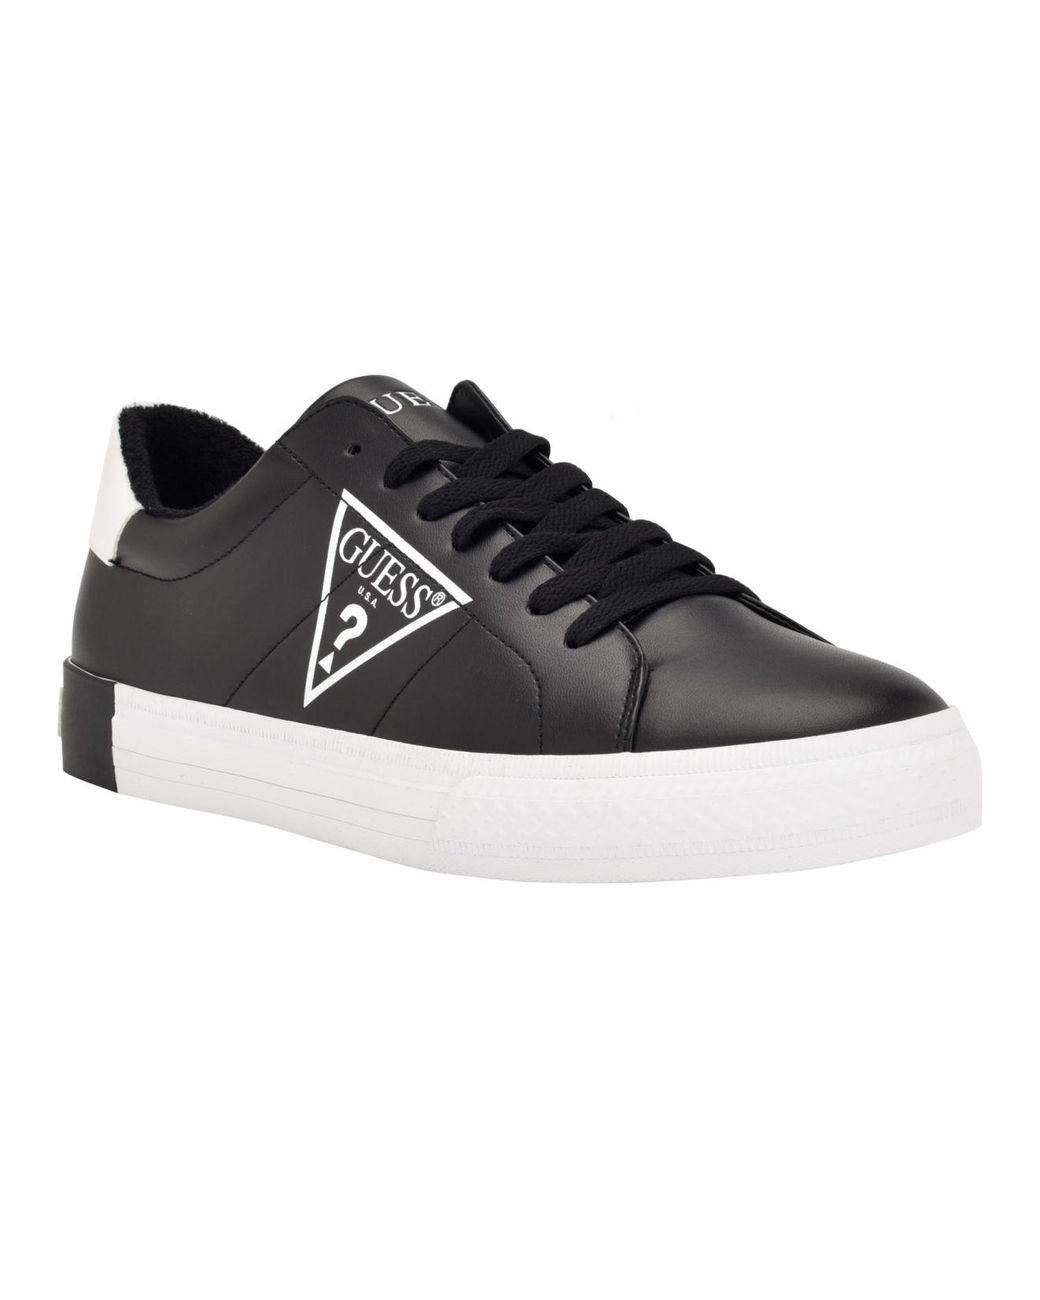 Guess Sevan Casual Low Top Lace Up Sneakers in Black for Men | Lyst